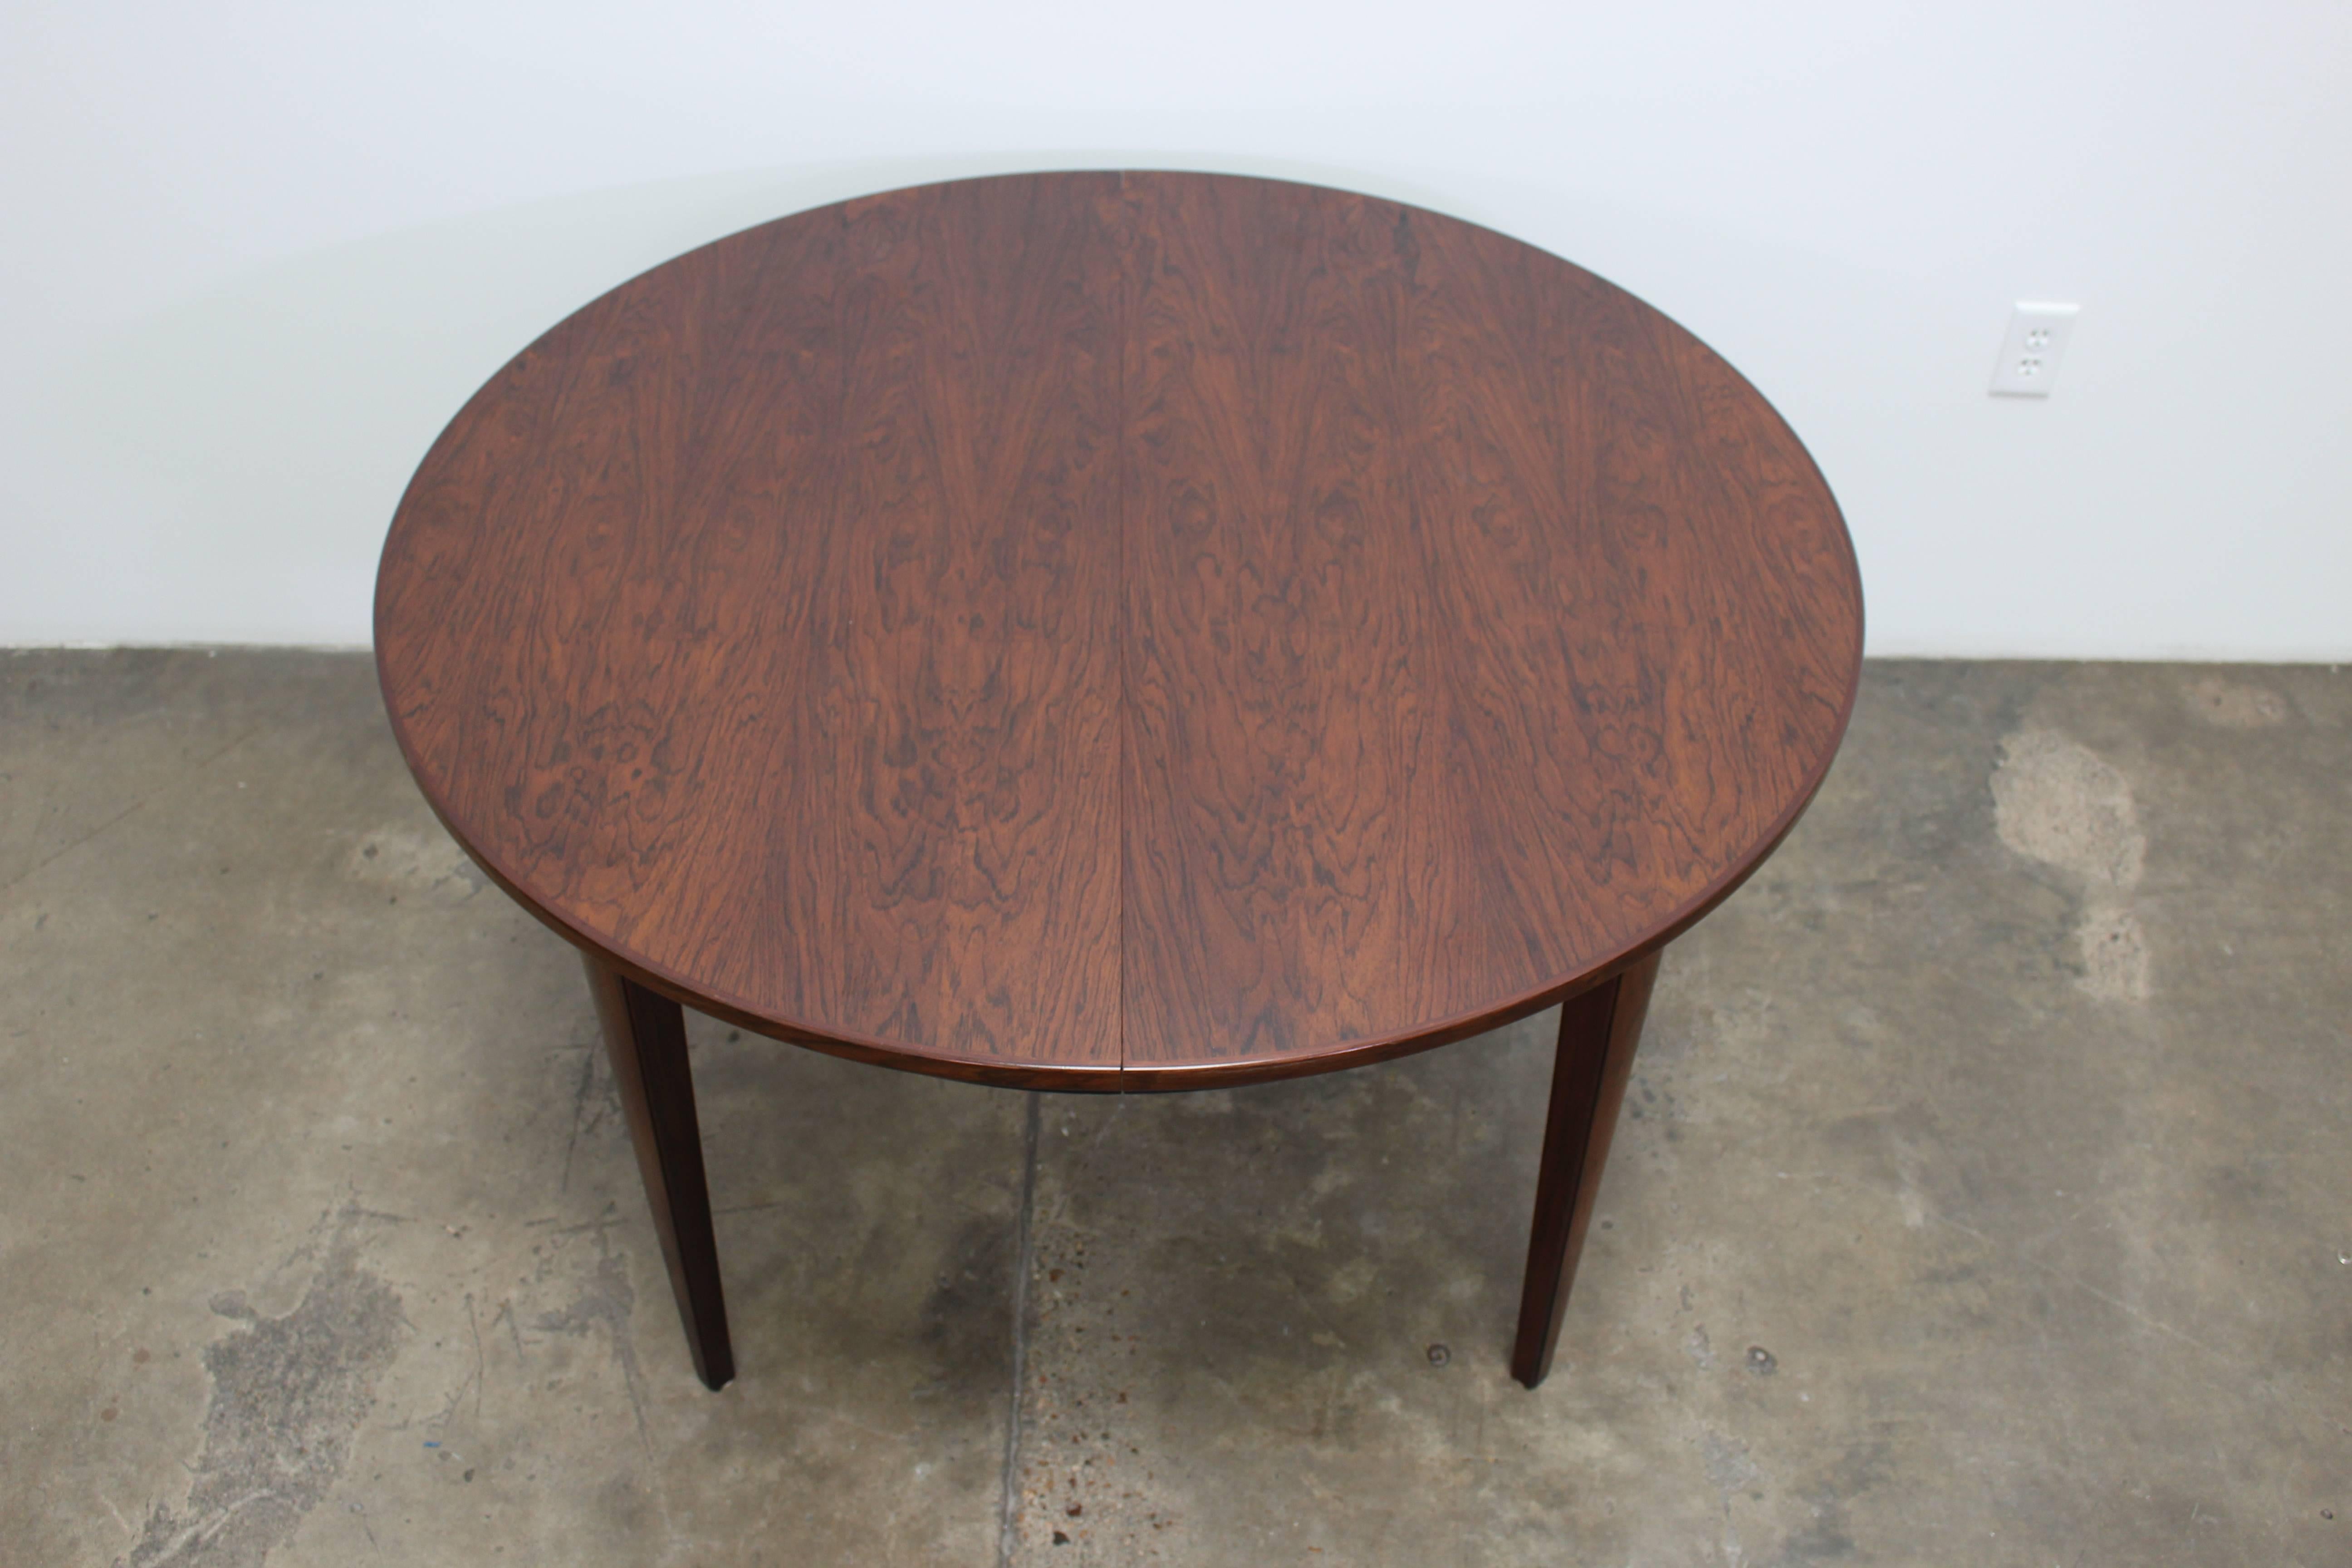 Circular rosewood dining table designed by Gunni Omann for Omann Jun. The rosewood on this table has a beautiful, intense grain and a shiny finish. There is a thin black band at the bottom of the apron that encompasses the entire table.